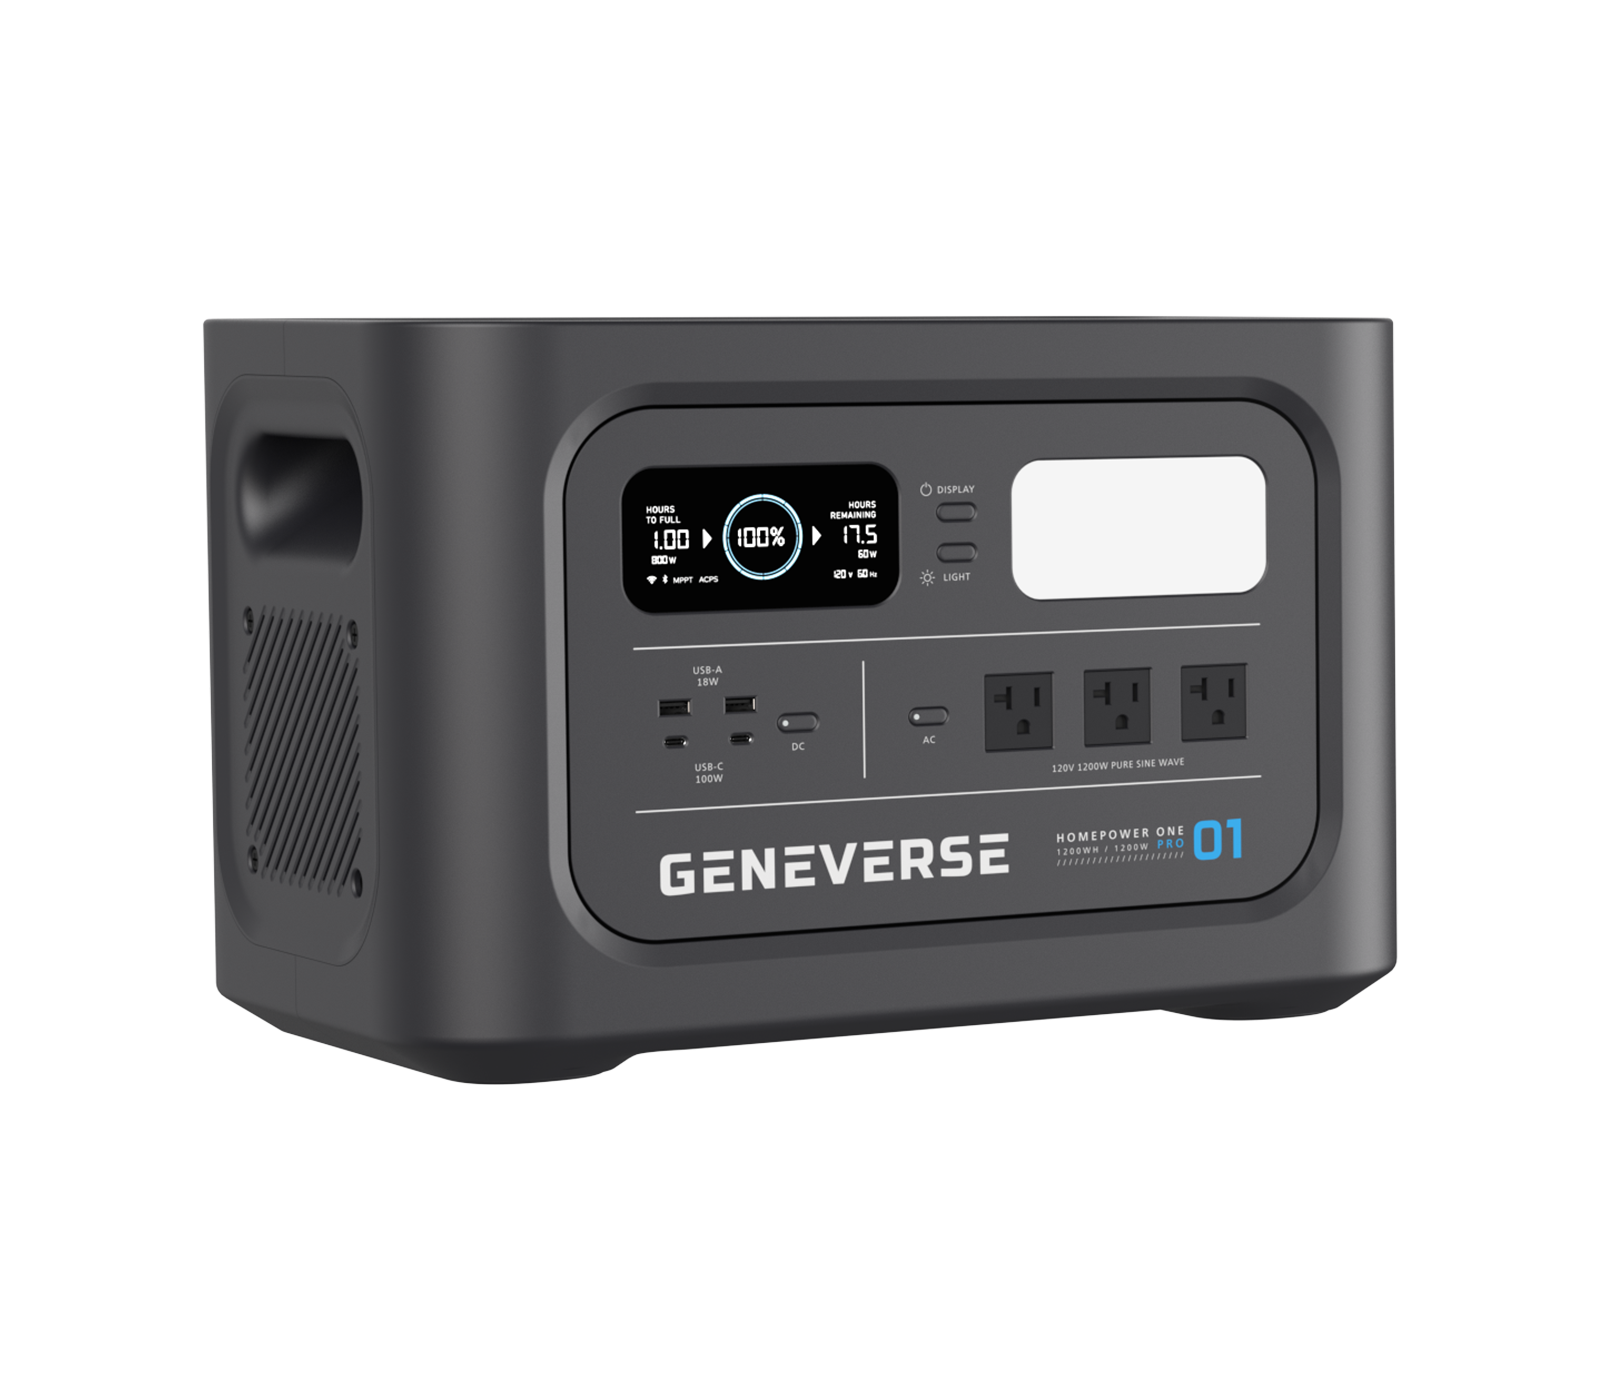 Geneverse PRO Series LiFePO4 Power Stations 1210-2419Wh, 1X HomePower ONE PRO (1200W/2400W Surge)